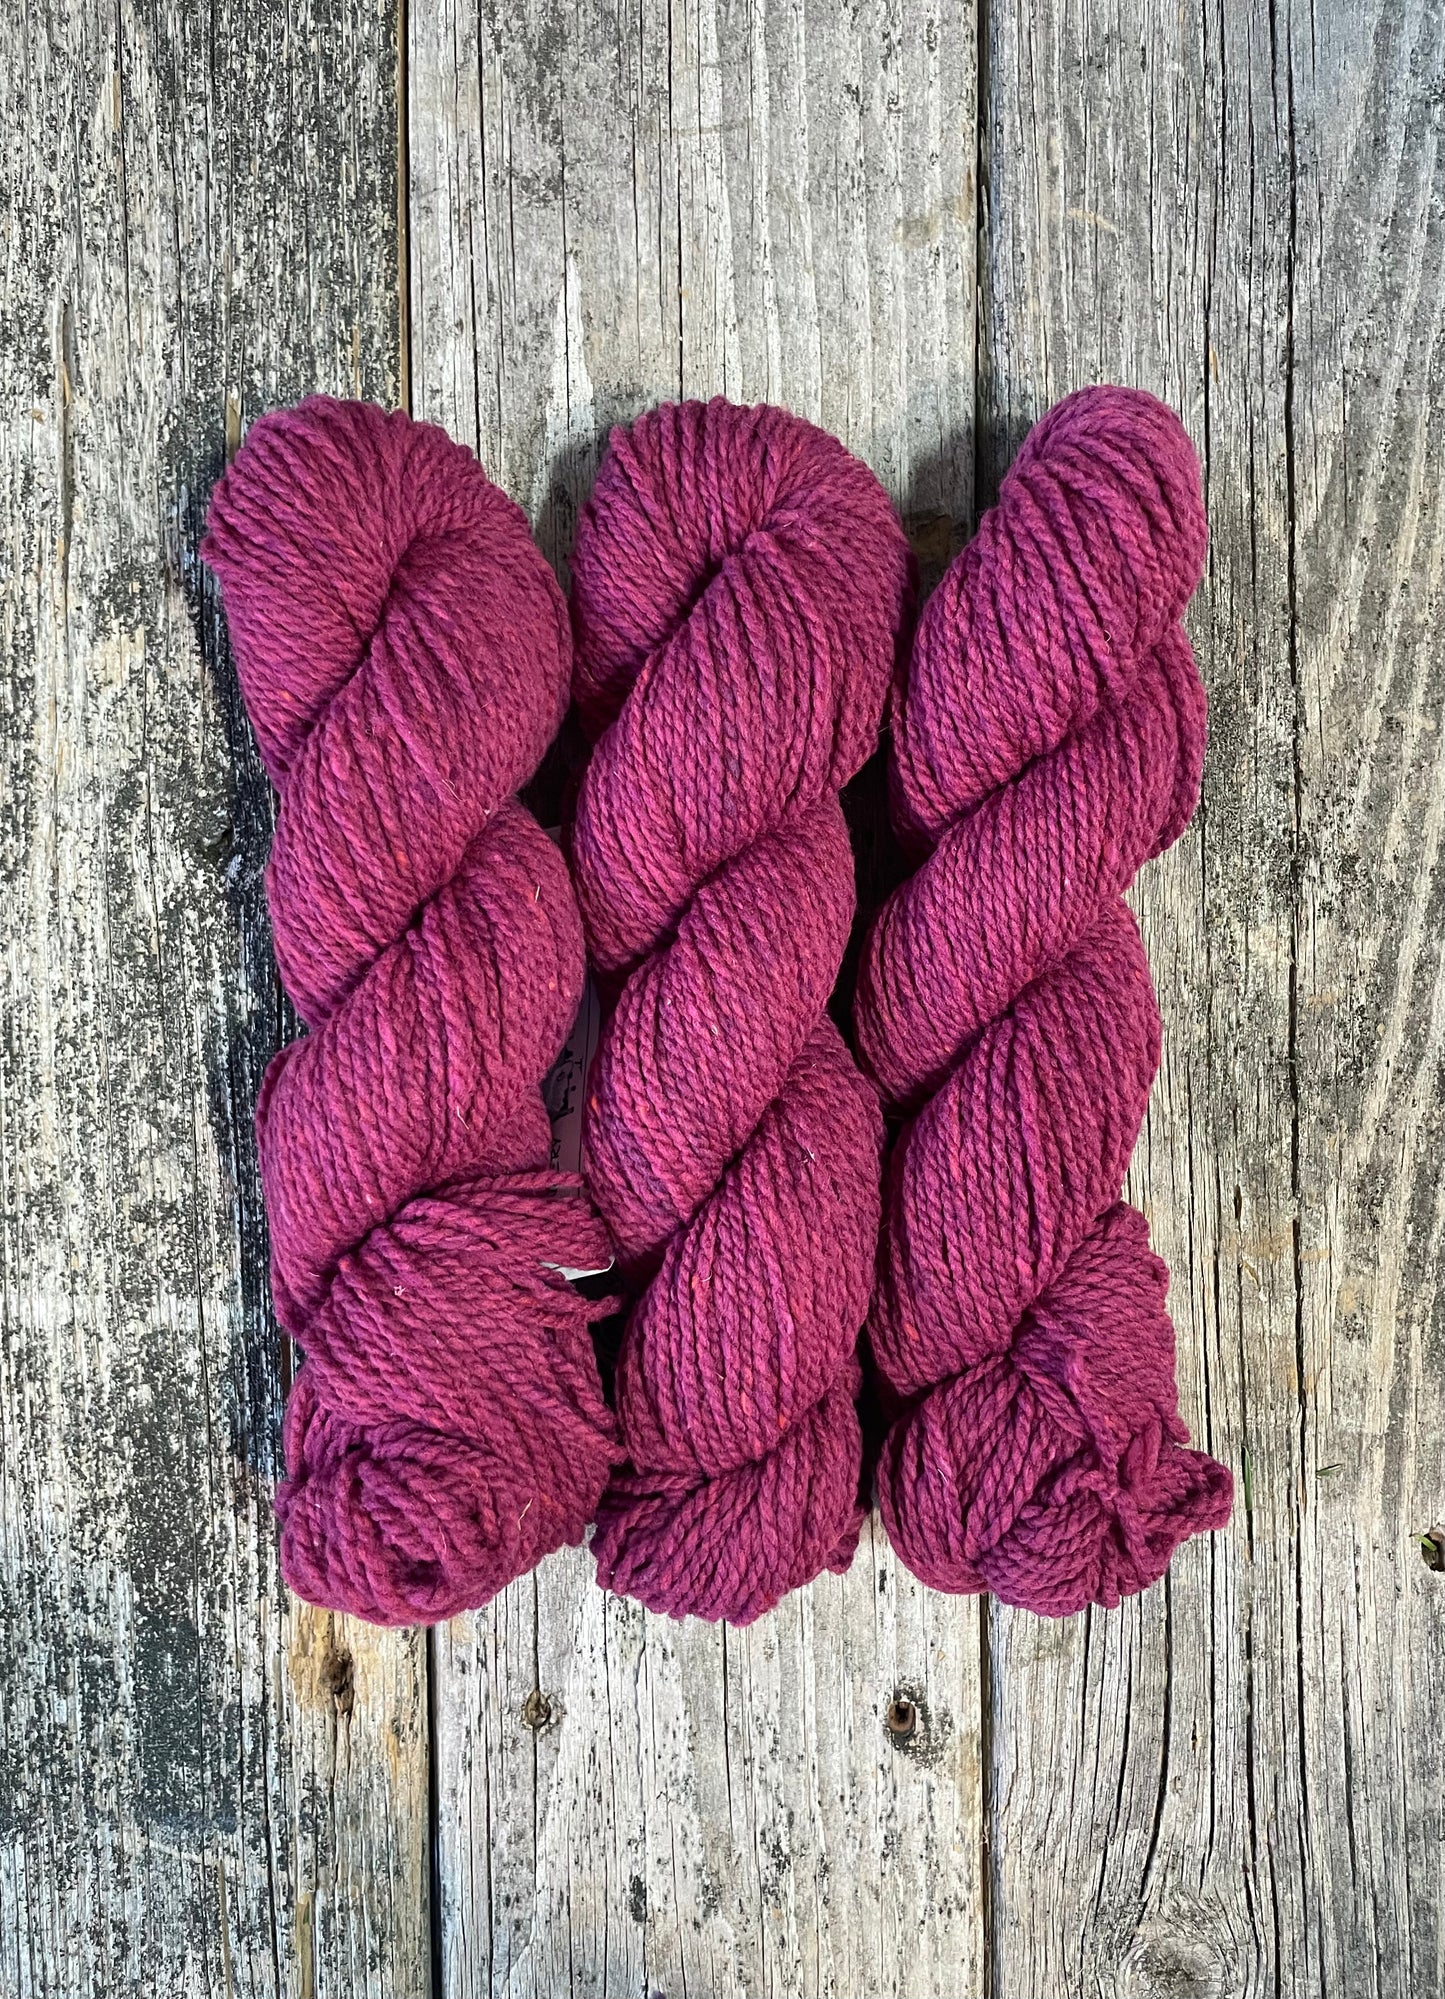 Weekend Wool: Orchid by Green Mountain Spinnery